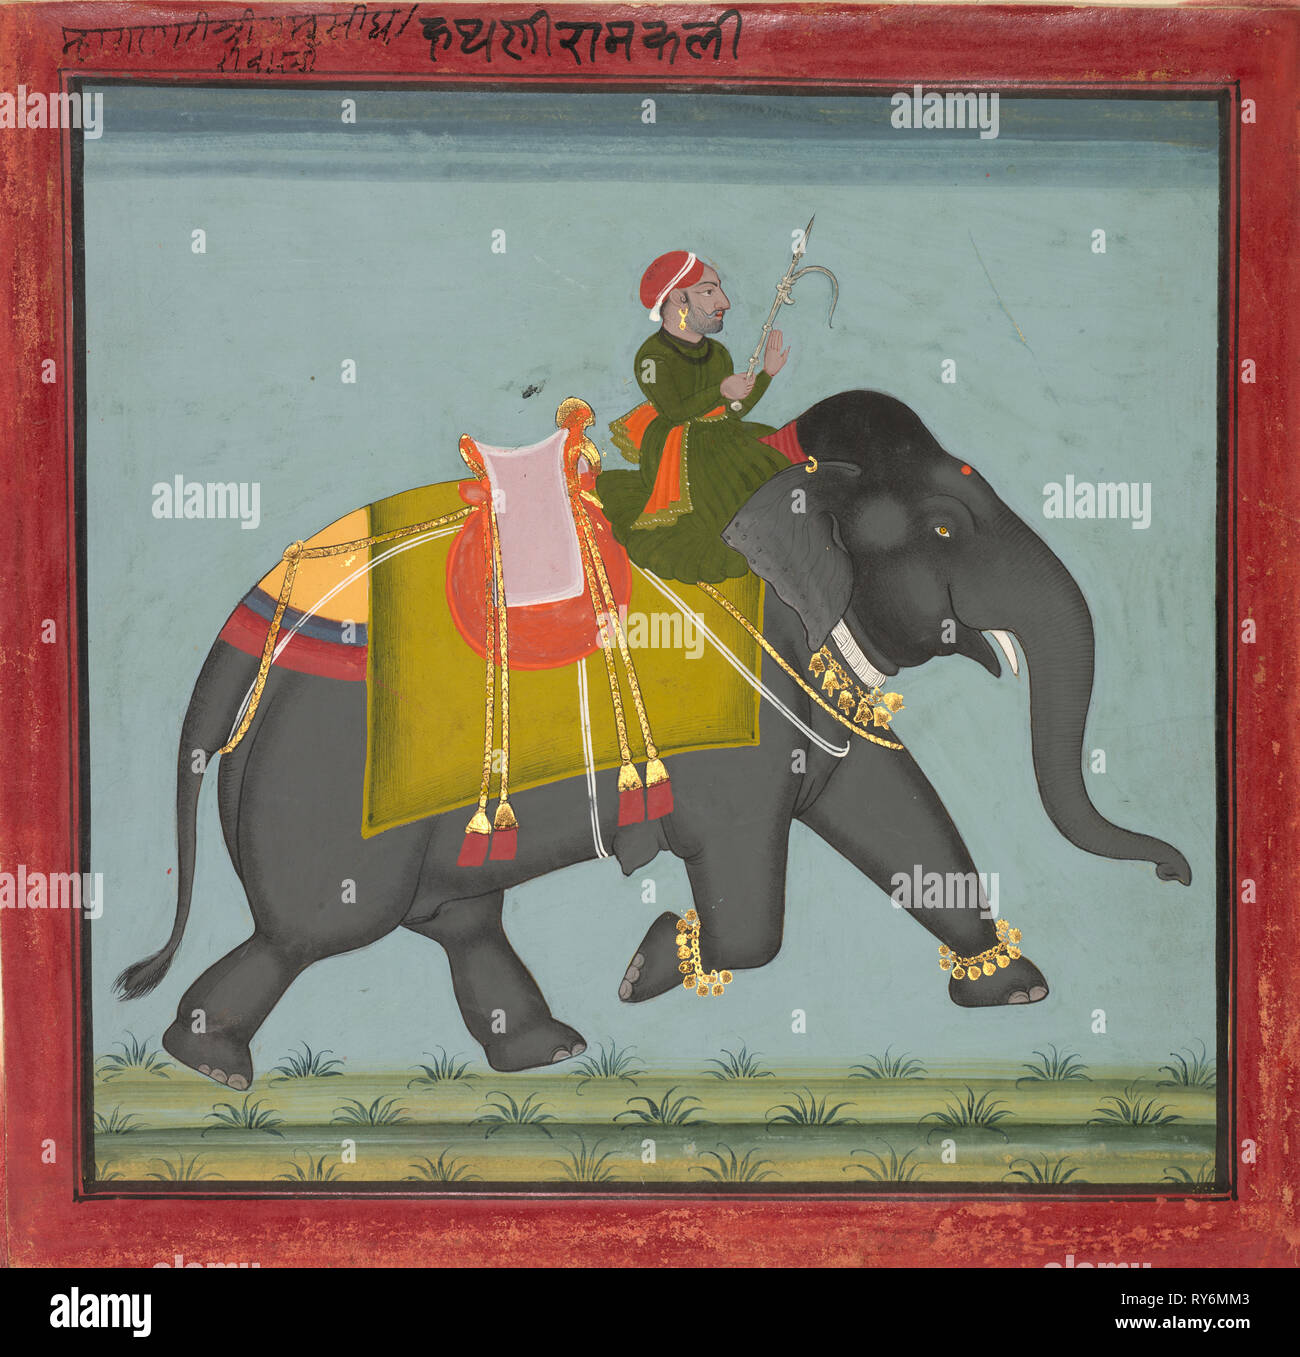 Caparisoned Elephant with a Mahout, dated 1761. India, Rajasthan, Mewar school. Ink and color on paper; image: 20.6 x 21.4 cm (8 1/8 x 8 7/16 in.); sheet with border: 24.1 x 25 cm (9 1/2 x 9 13/16 in Stock Photo